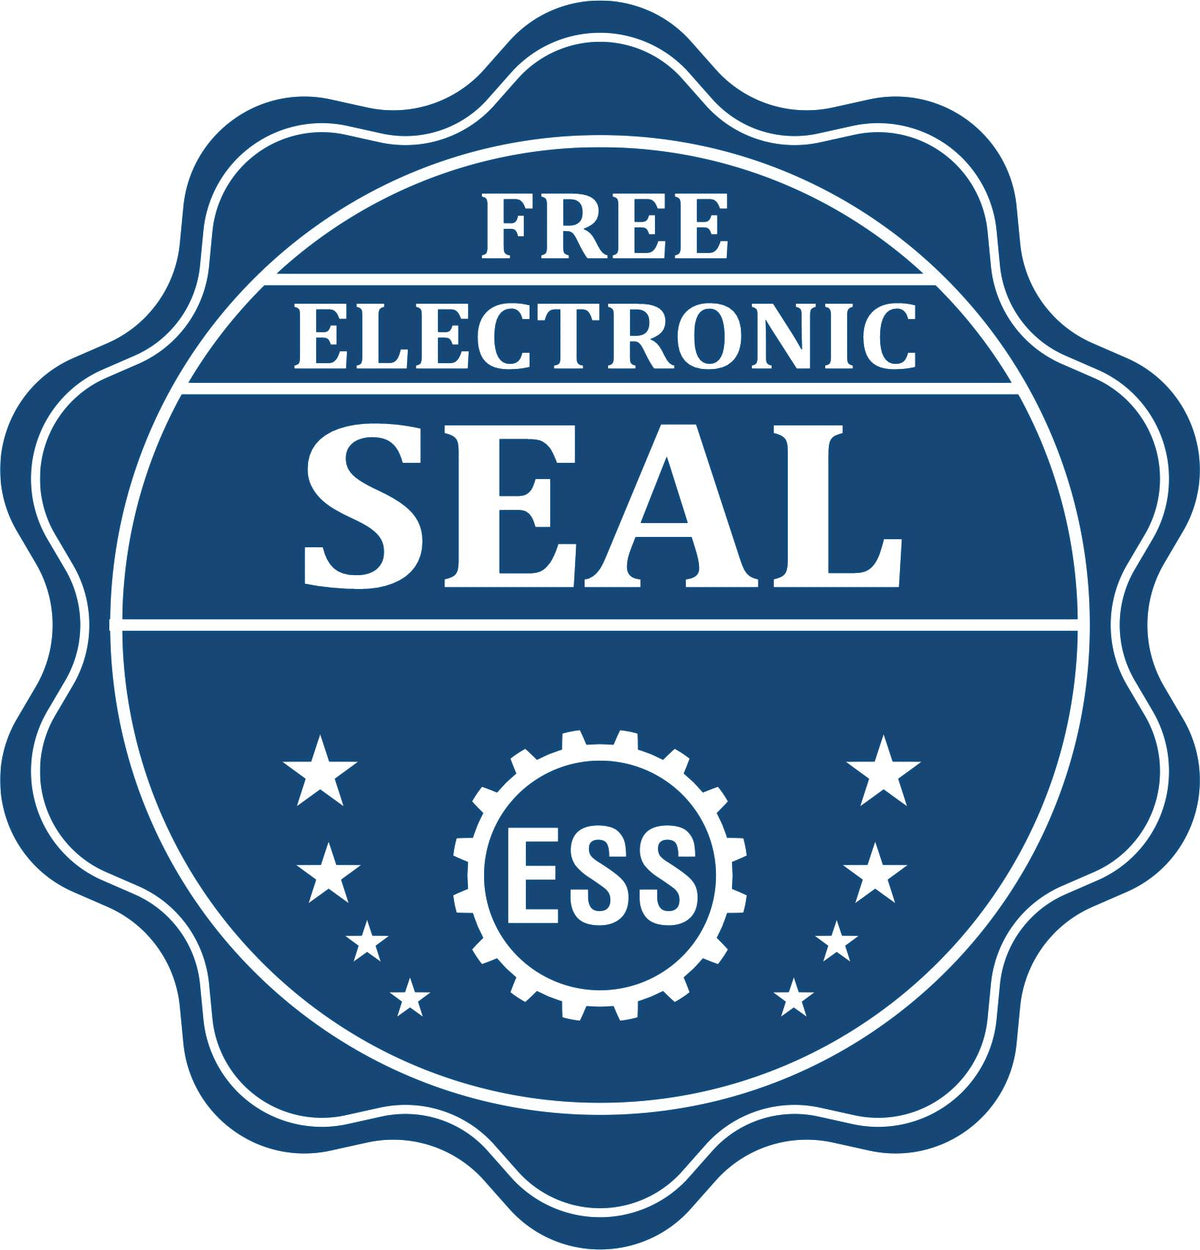 A badge showing a free electronic seal for the Soft New York Professional Geologist Seal with stars and the ESS gear on the emblem.